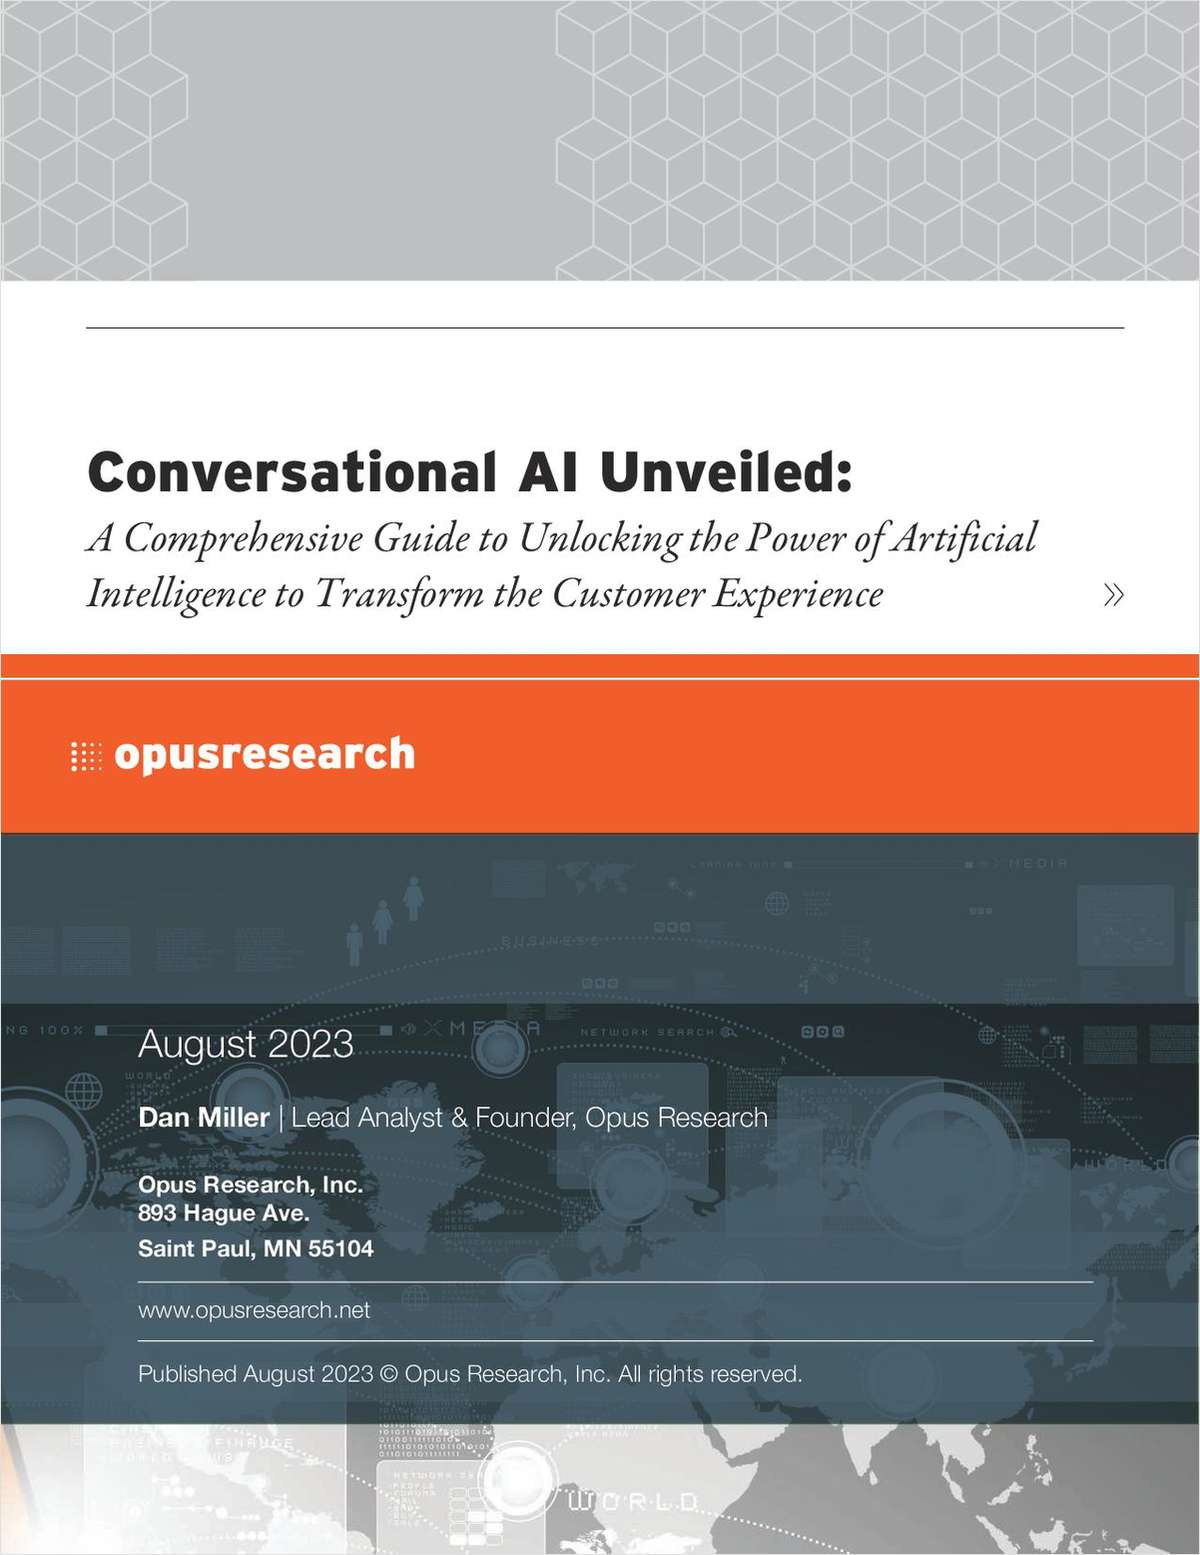 Conversational AI Unveiled: A Comprehensive Guide to Unlocking the Power of Artificial Intelligence to Transform the Customer Experience